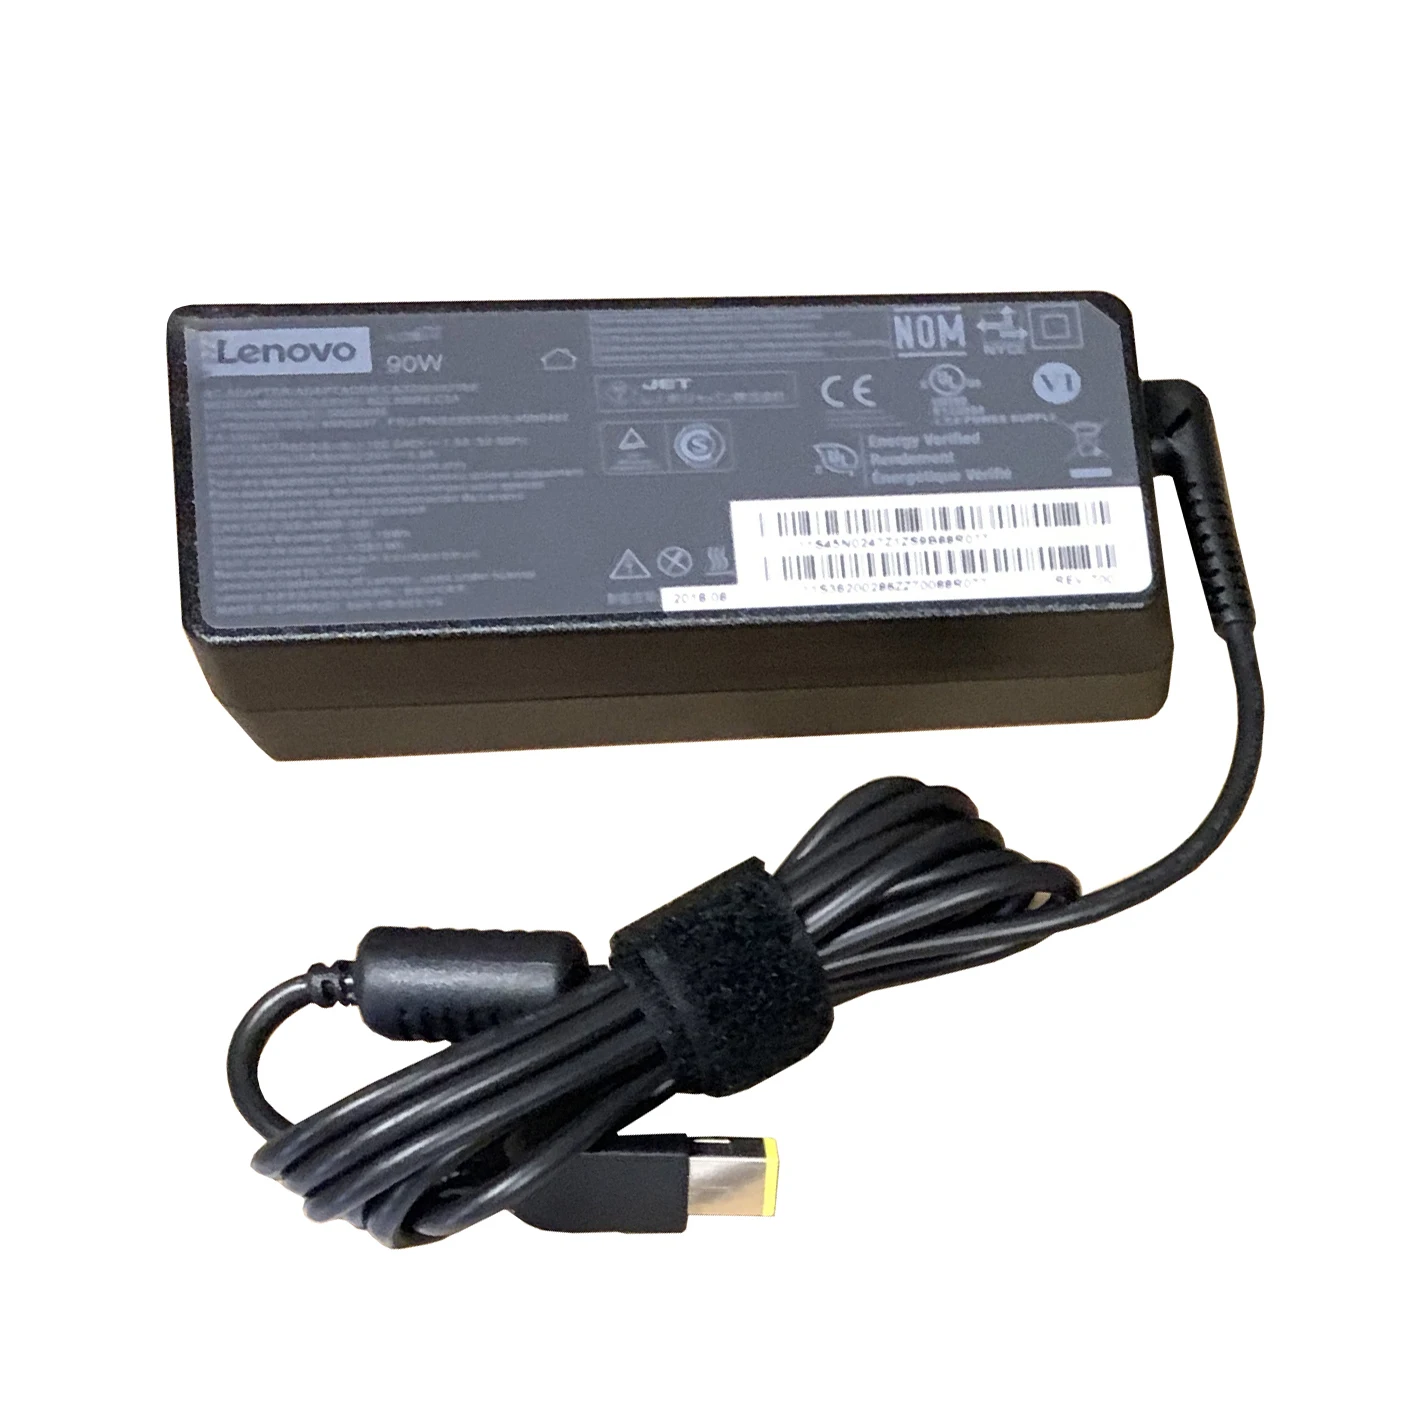 1 Used Docking Station 1 Power Adapter Lenovo Ultradock for T440-T470s 